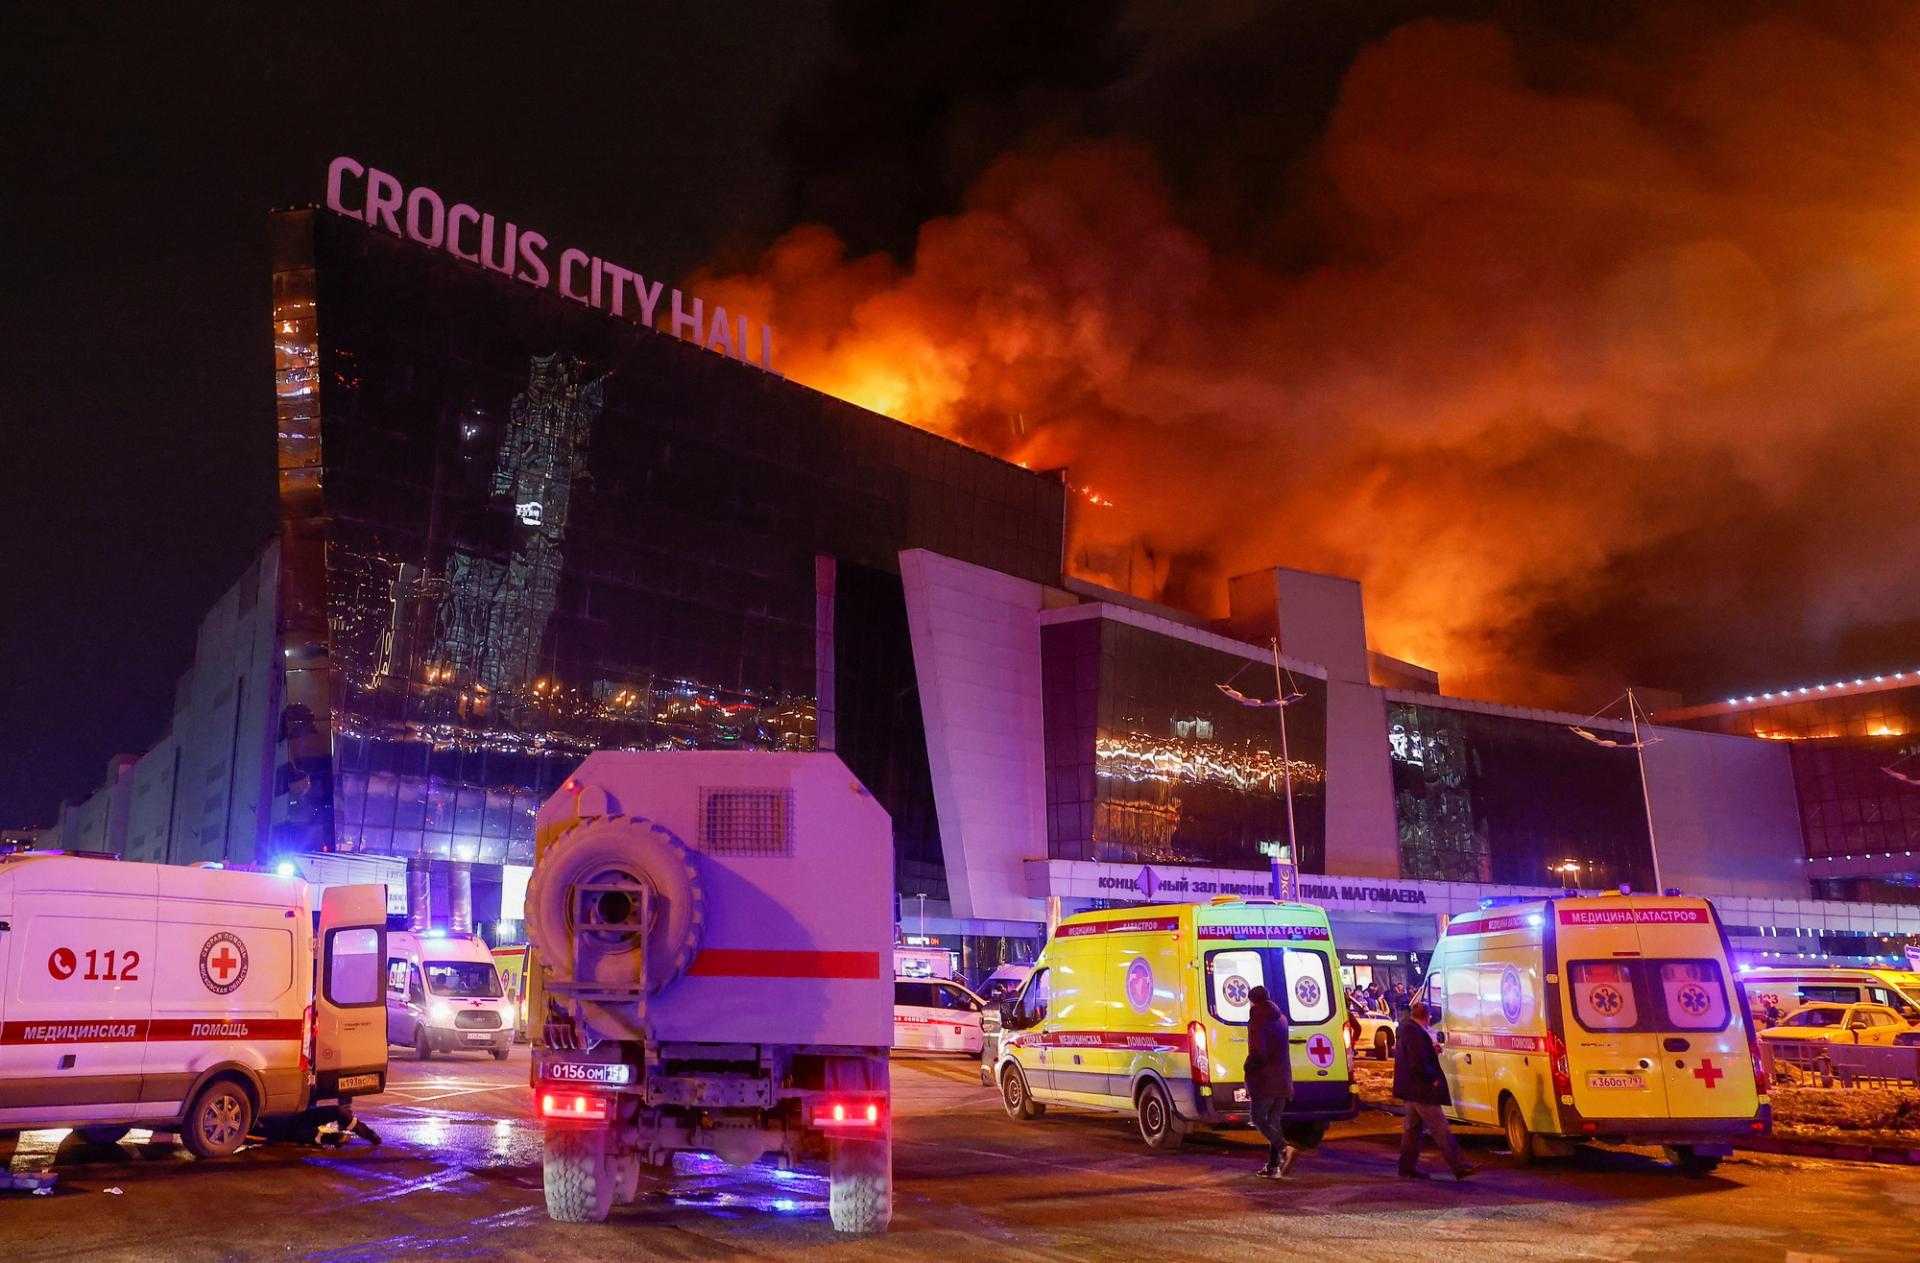 Vehicles of Russian emergency services are parked near the burning Crocus City Hall concert venue following a shooting incident in the outskirts of Moscow.